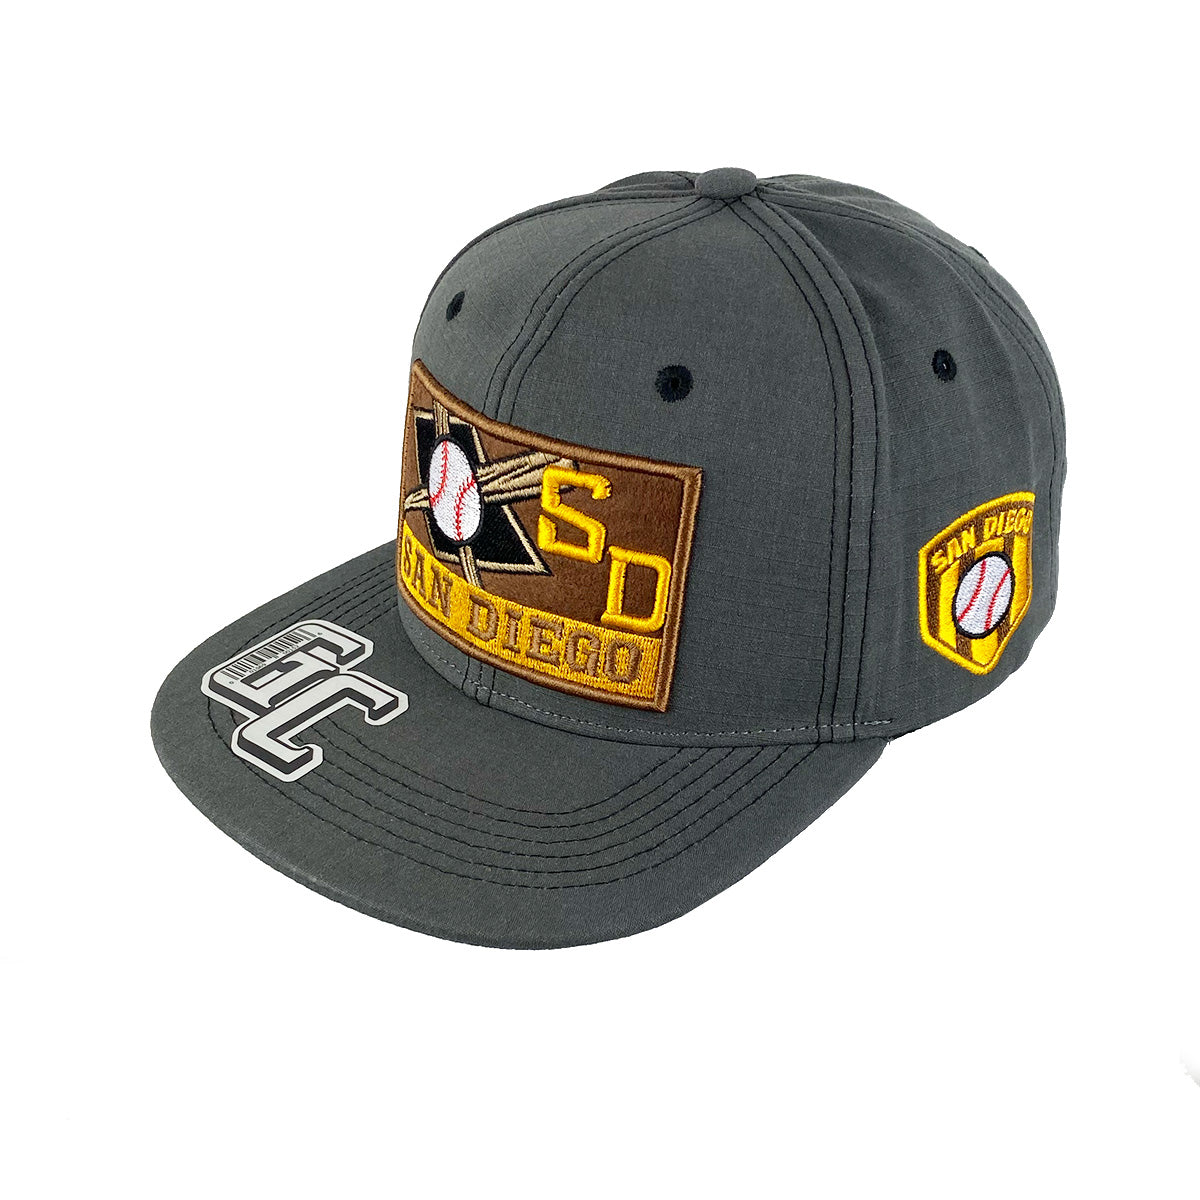 Snapback "San Diego" Hat Embroidered